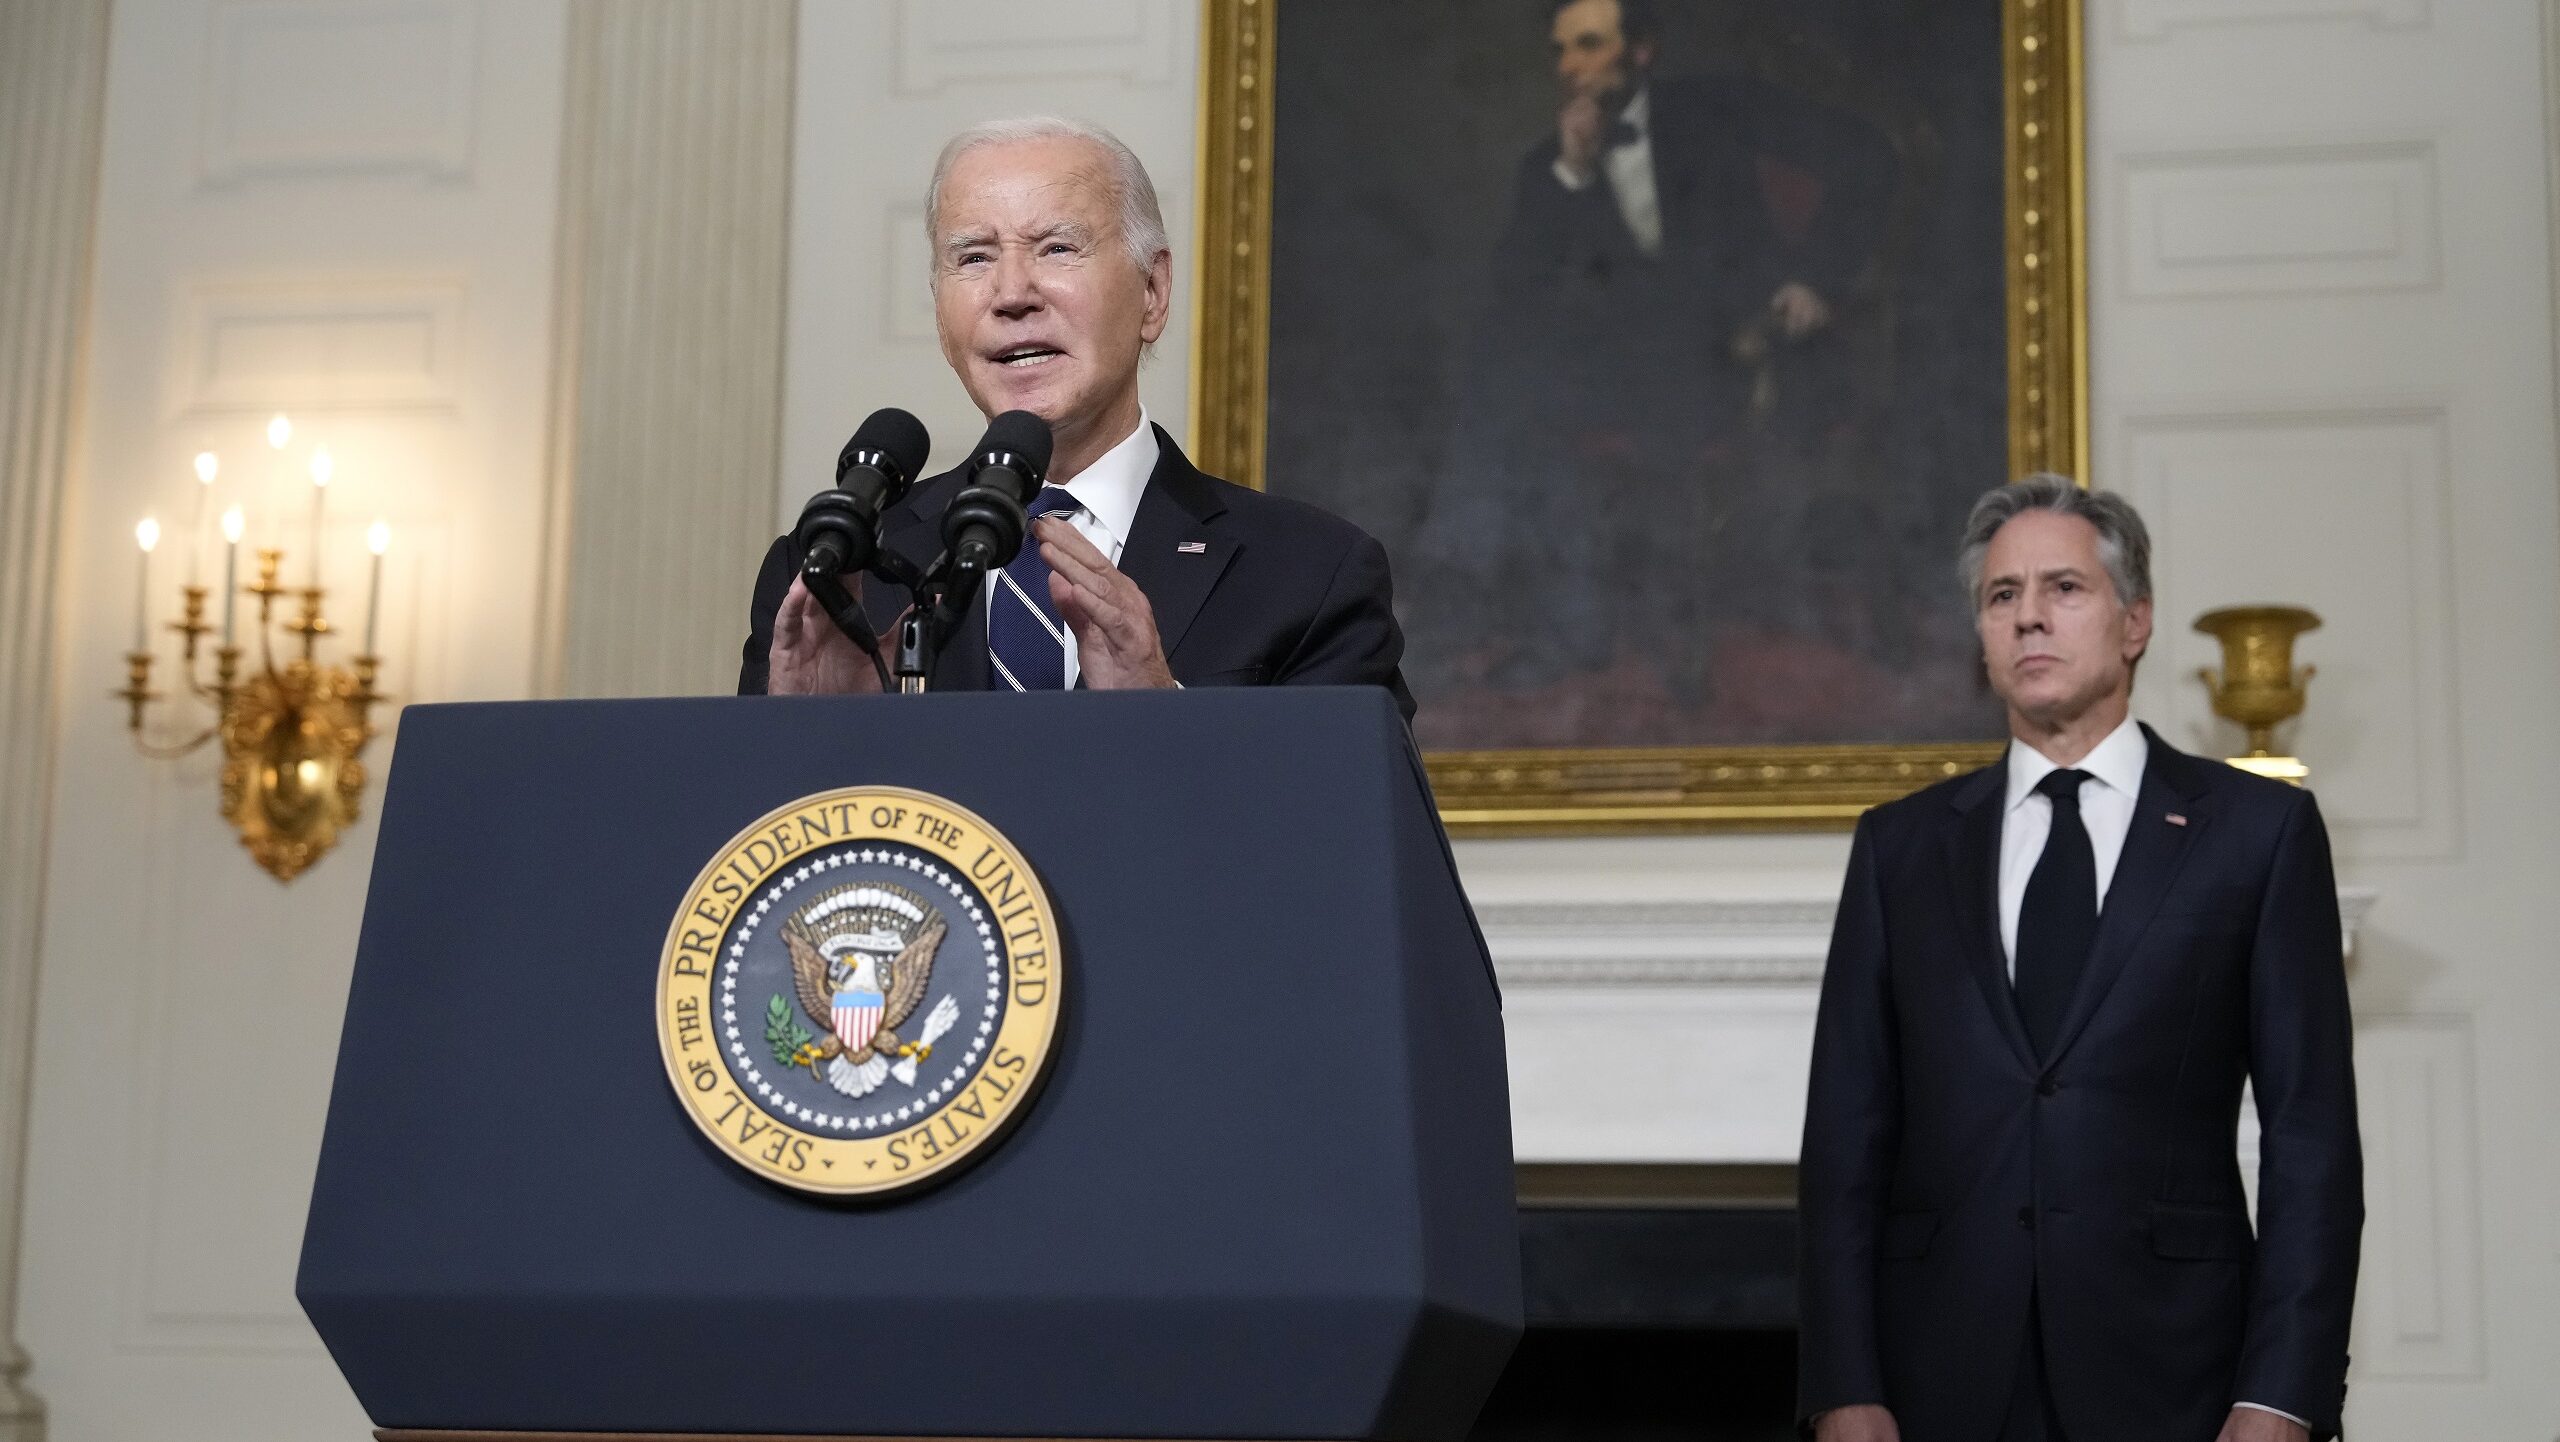 Biden Is in a Hurry To End the War in Order To Devote Himself to His Battle With Trump